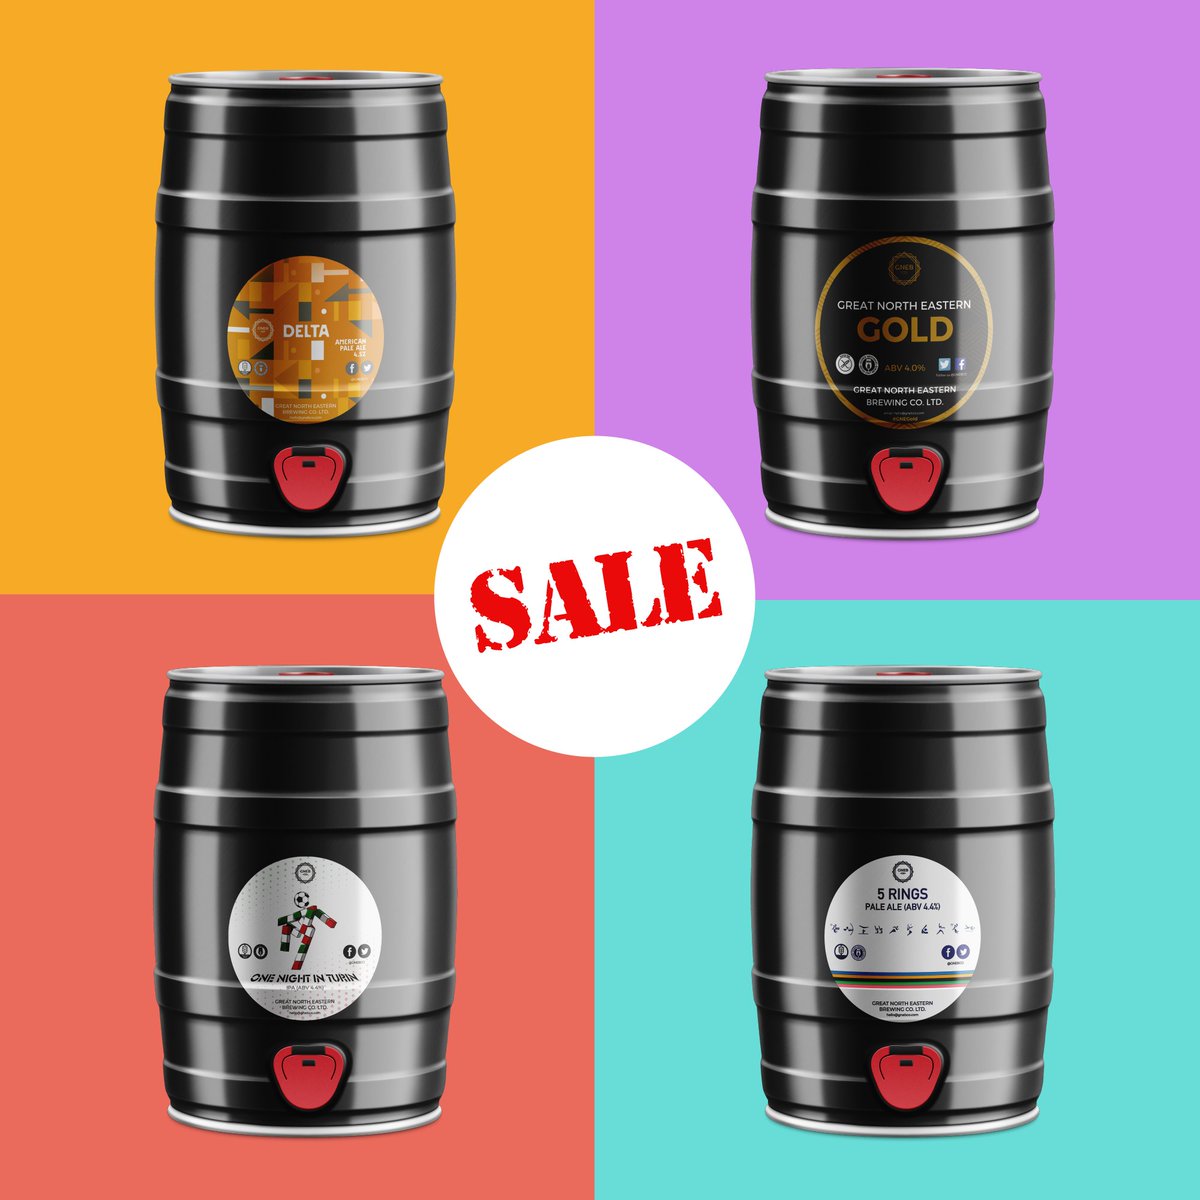 💥💥💥FLASH SALE💥💥💥 £20 MINIKEGS AND CASKS - COLLECTION ONLY Offer ends Friday at close. Choose from: DELTA APA (4.5%) - KEG GNEB GOLD (4.0%) - CASK ONE NIGHT IN TURIN (4.4%) - CASK 5 RINGS (4.4%) - CASK GNEBCO, Contract House, Wellington Road, Dunston, Gateshead